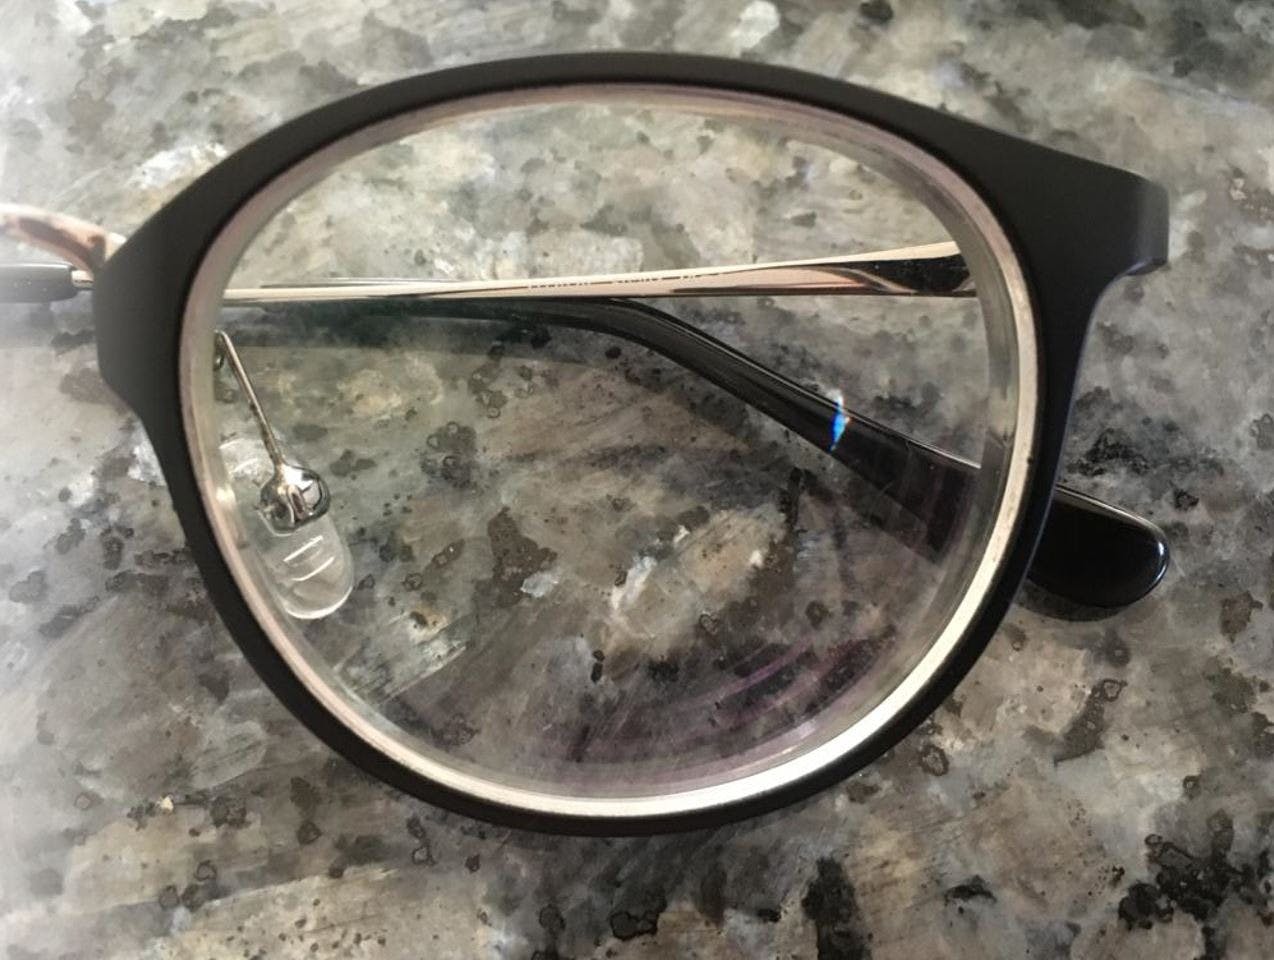 A closer look of this glasses